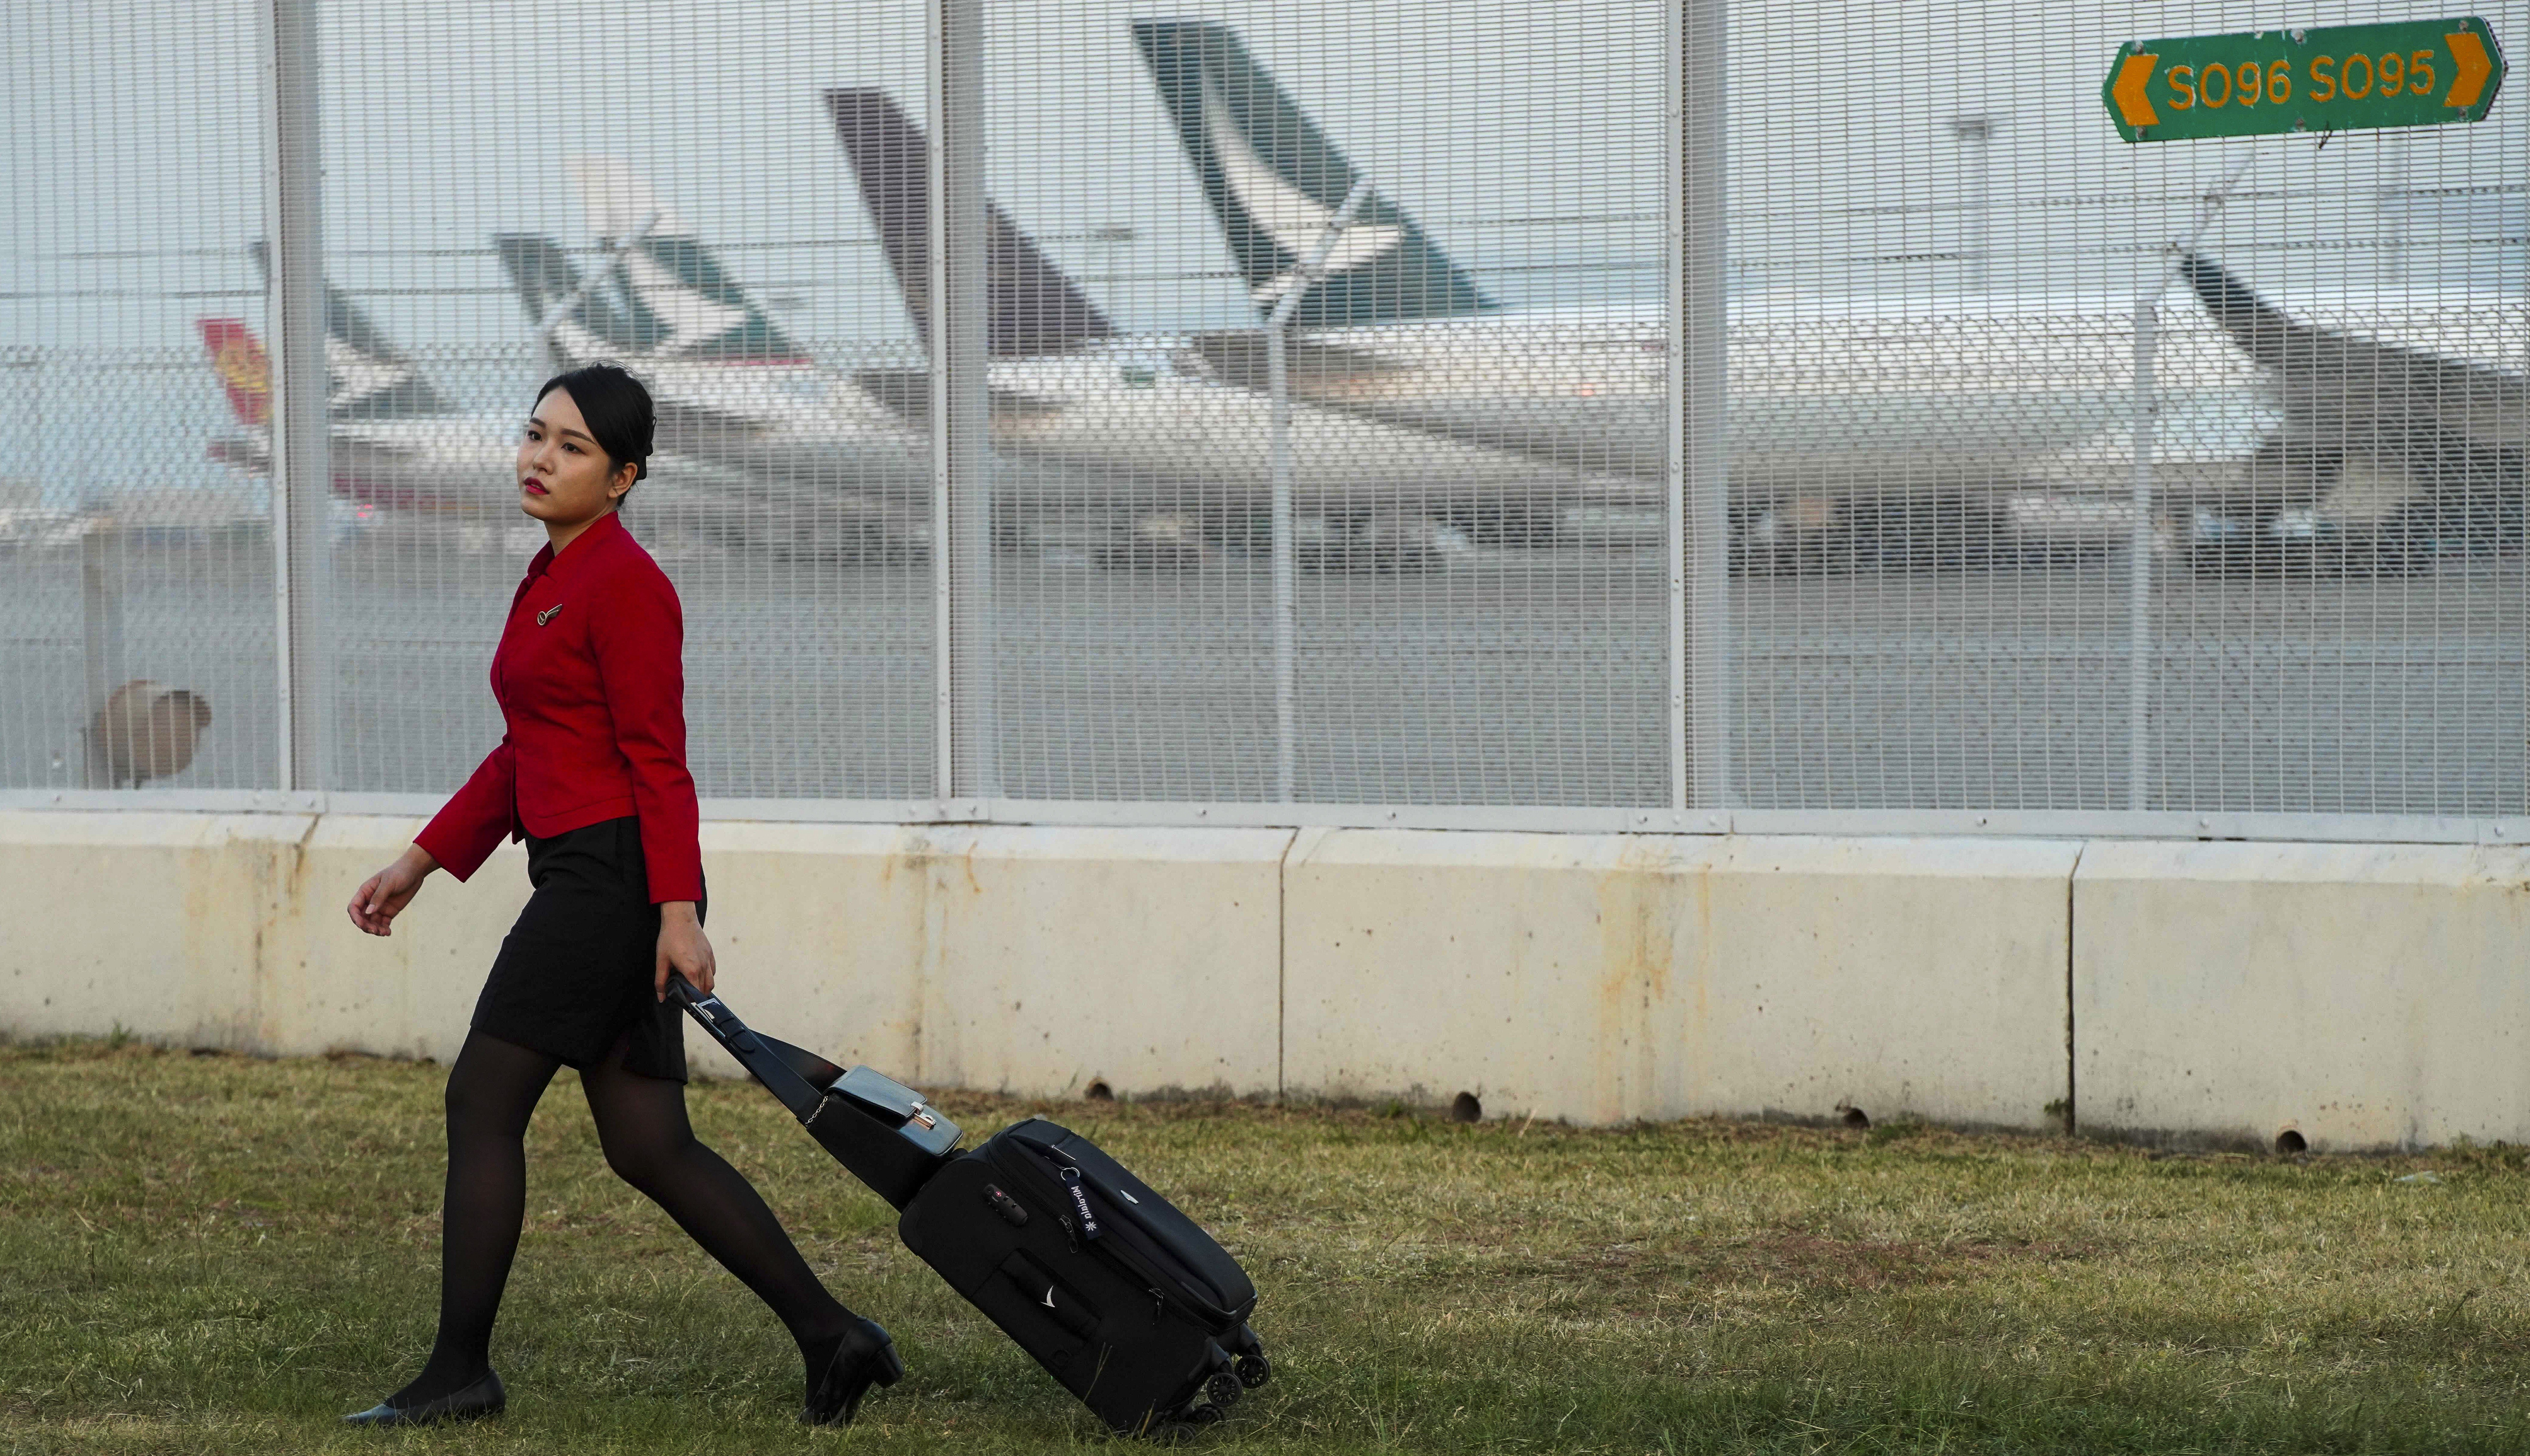 A Cathay Pacific flight attendant wheels her luggage past a parking bay for the company’s aircraft. Photo: Robert Ng